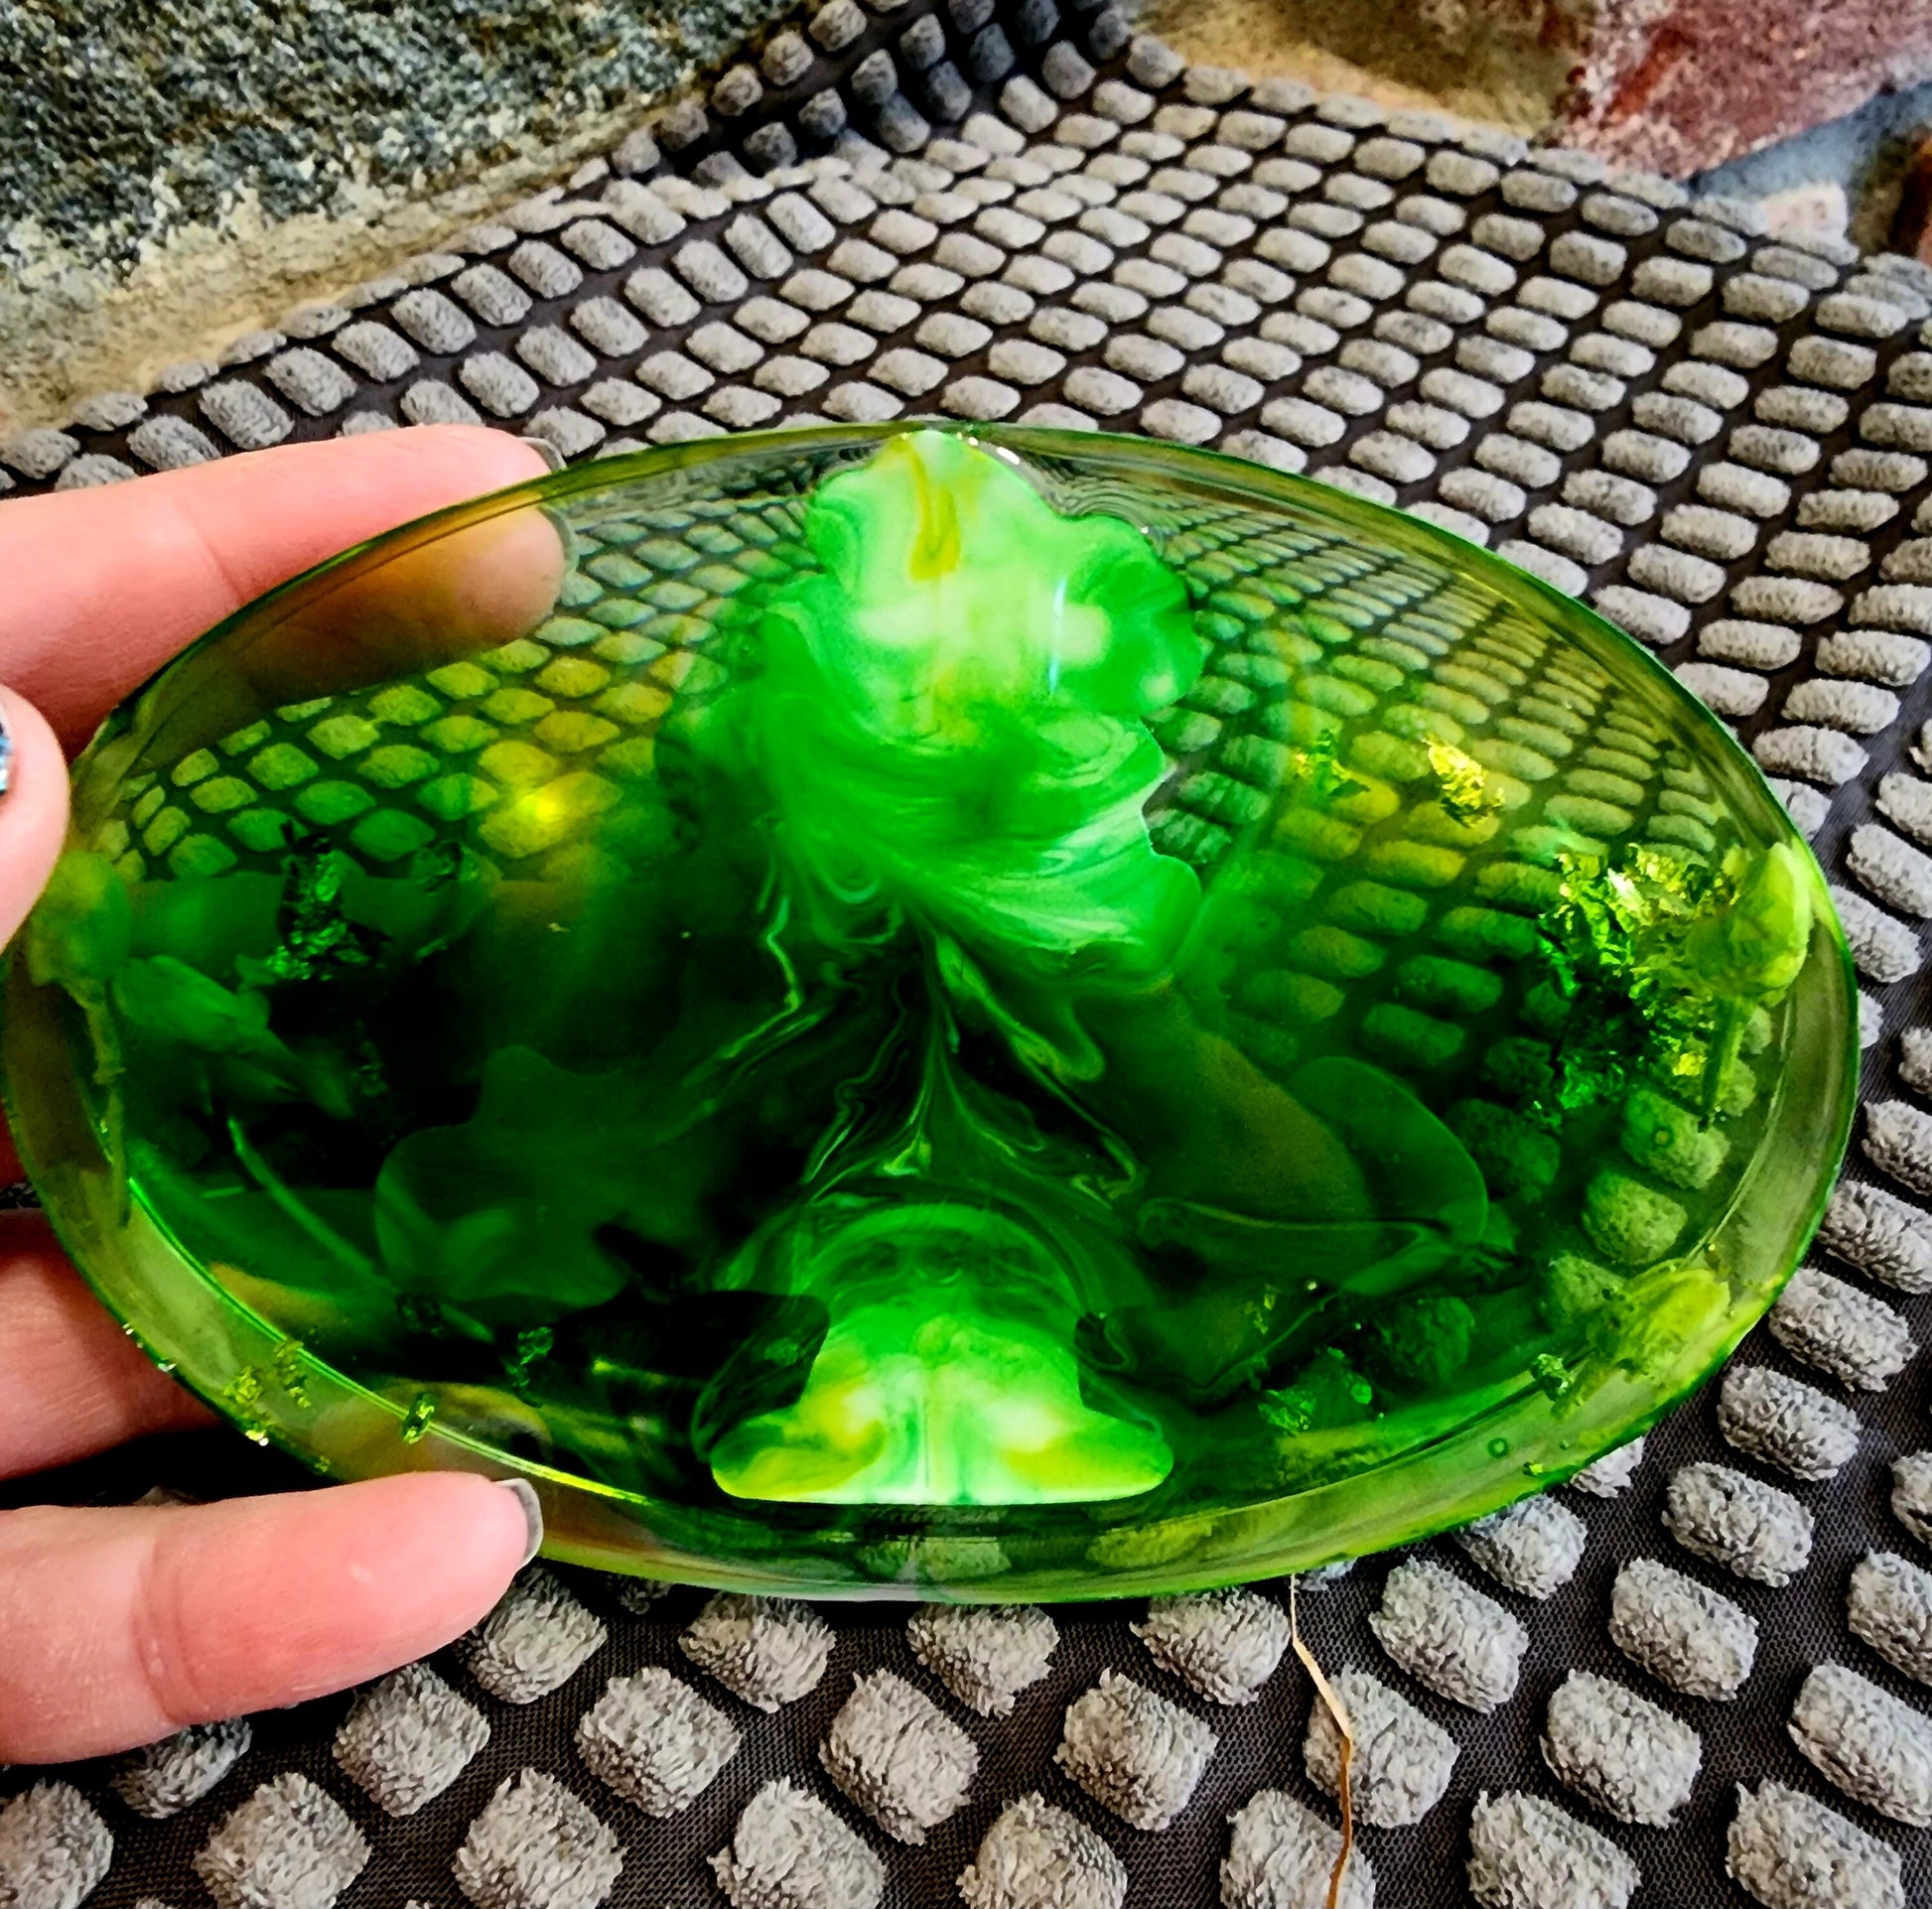 California Resin Dish, State Dishes Collection